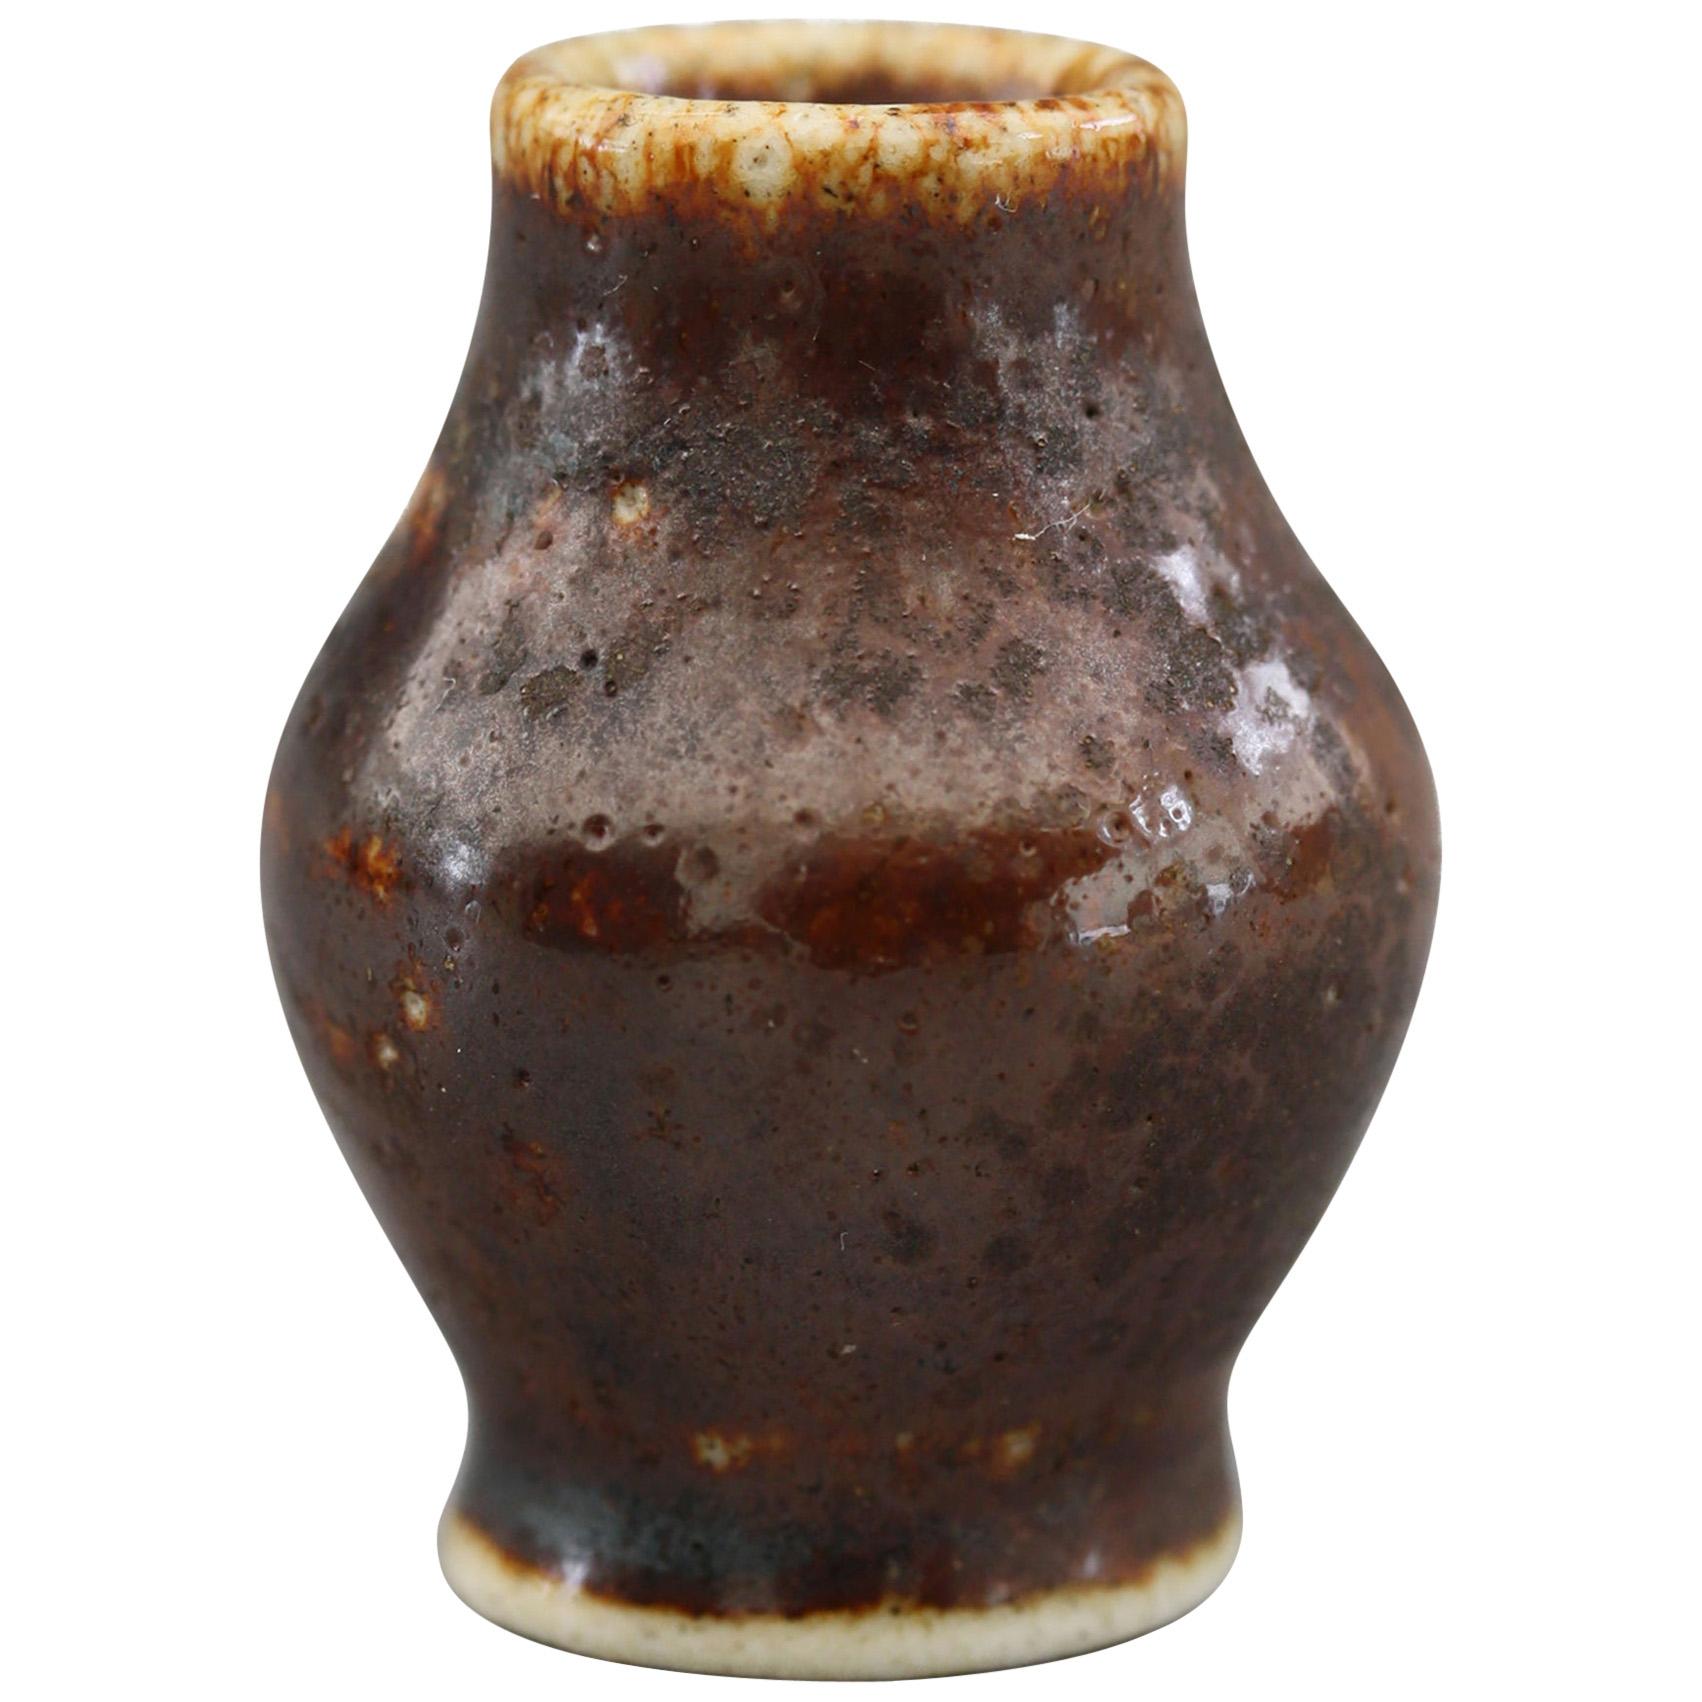 Martin Brothers Art Pottery Miniature Brown Glazed Vase by Walter Martin